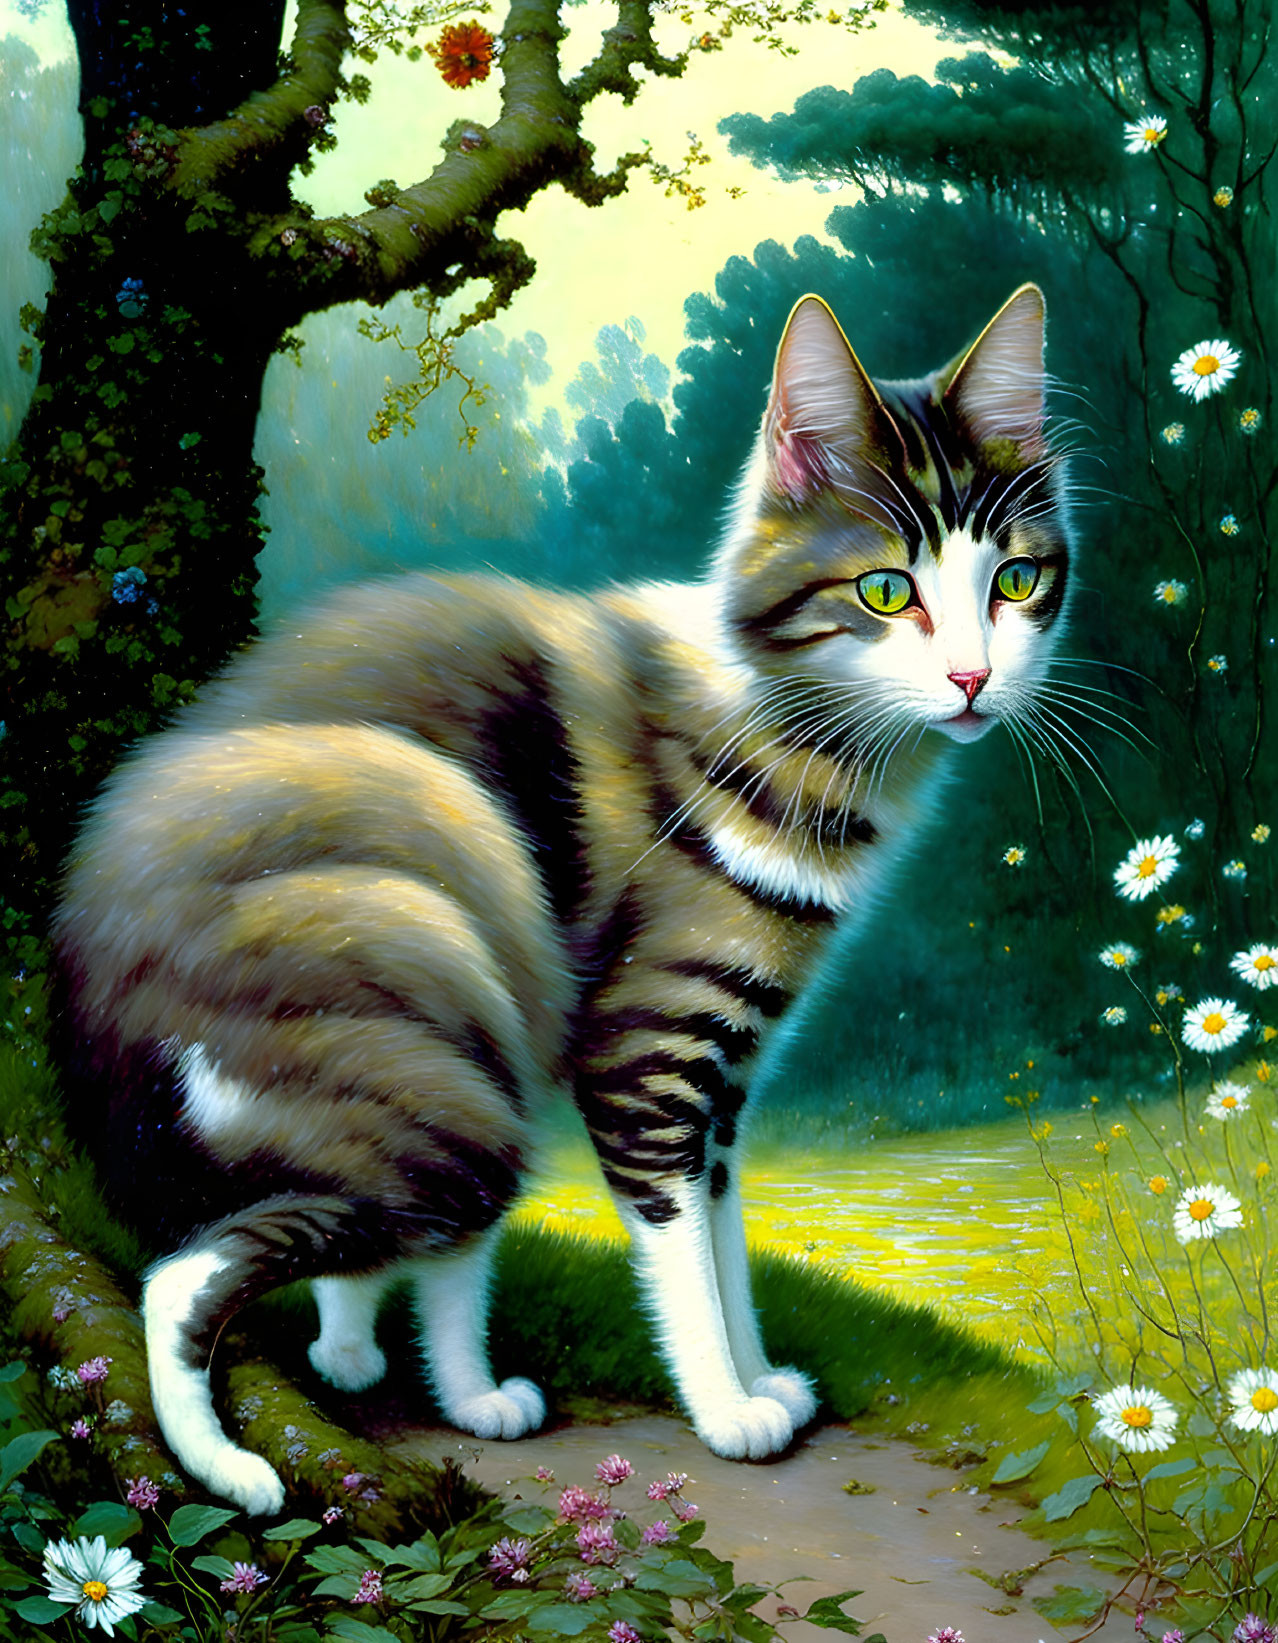 Vibrant tabby cat in lush forest setting with white flowers